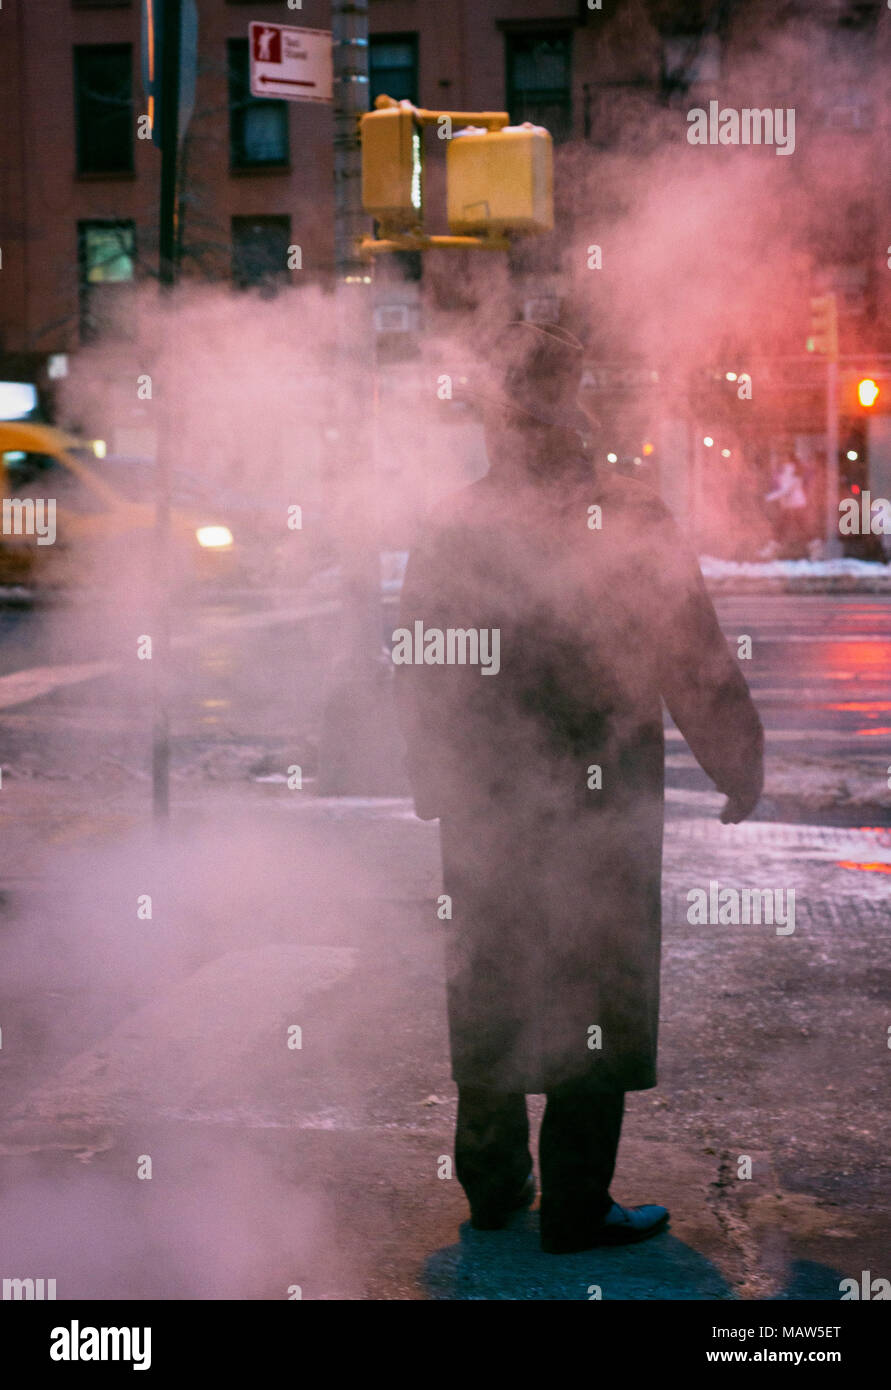 A man wearing a fedora standing on a steamy street in New York city. Stock Photo